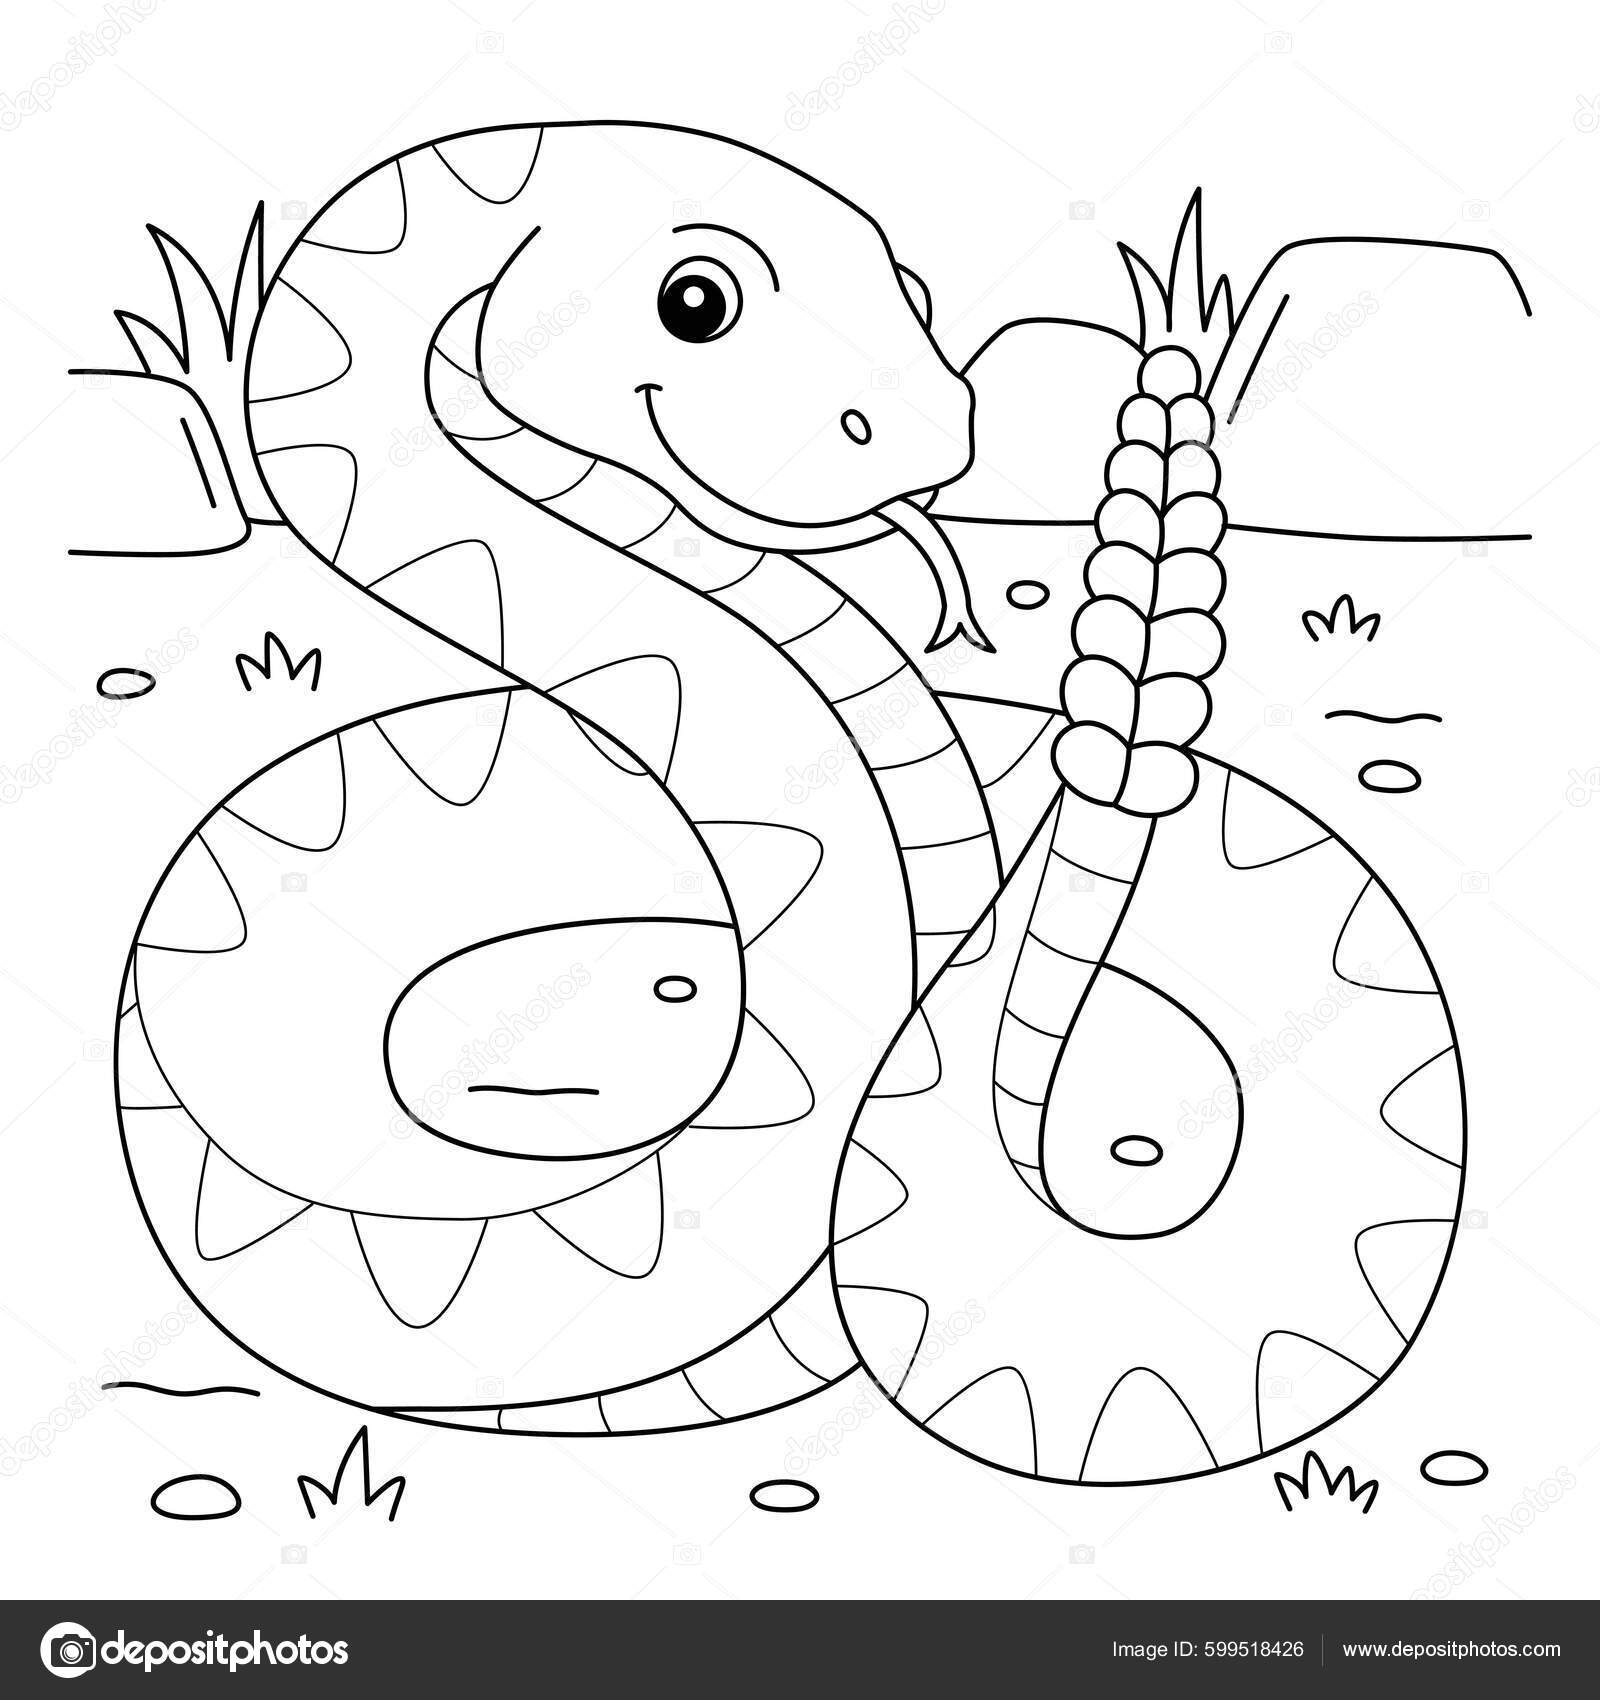 Cute funny coloring page rattlesnake provides hours coloring fun children stock vector by abbydesign